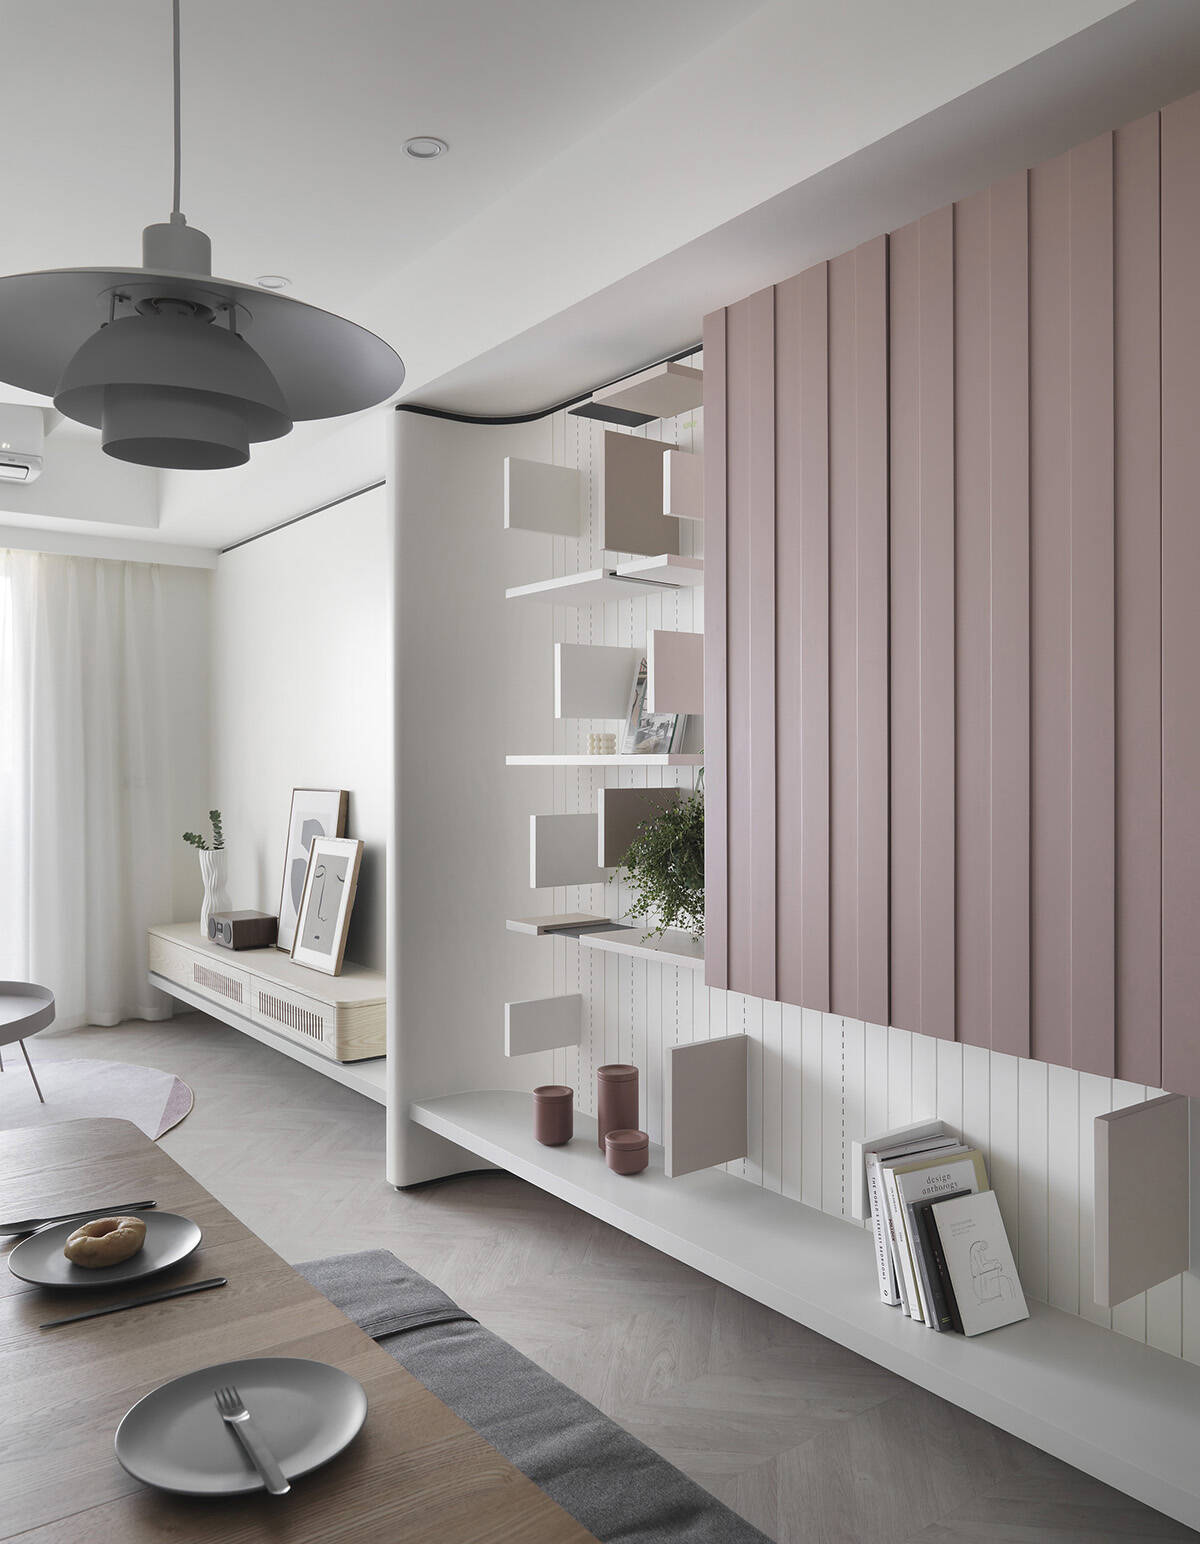 Displaying and designing mood and memory for home has never been easier thanks to the pretty, graceful pink cabinets.